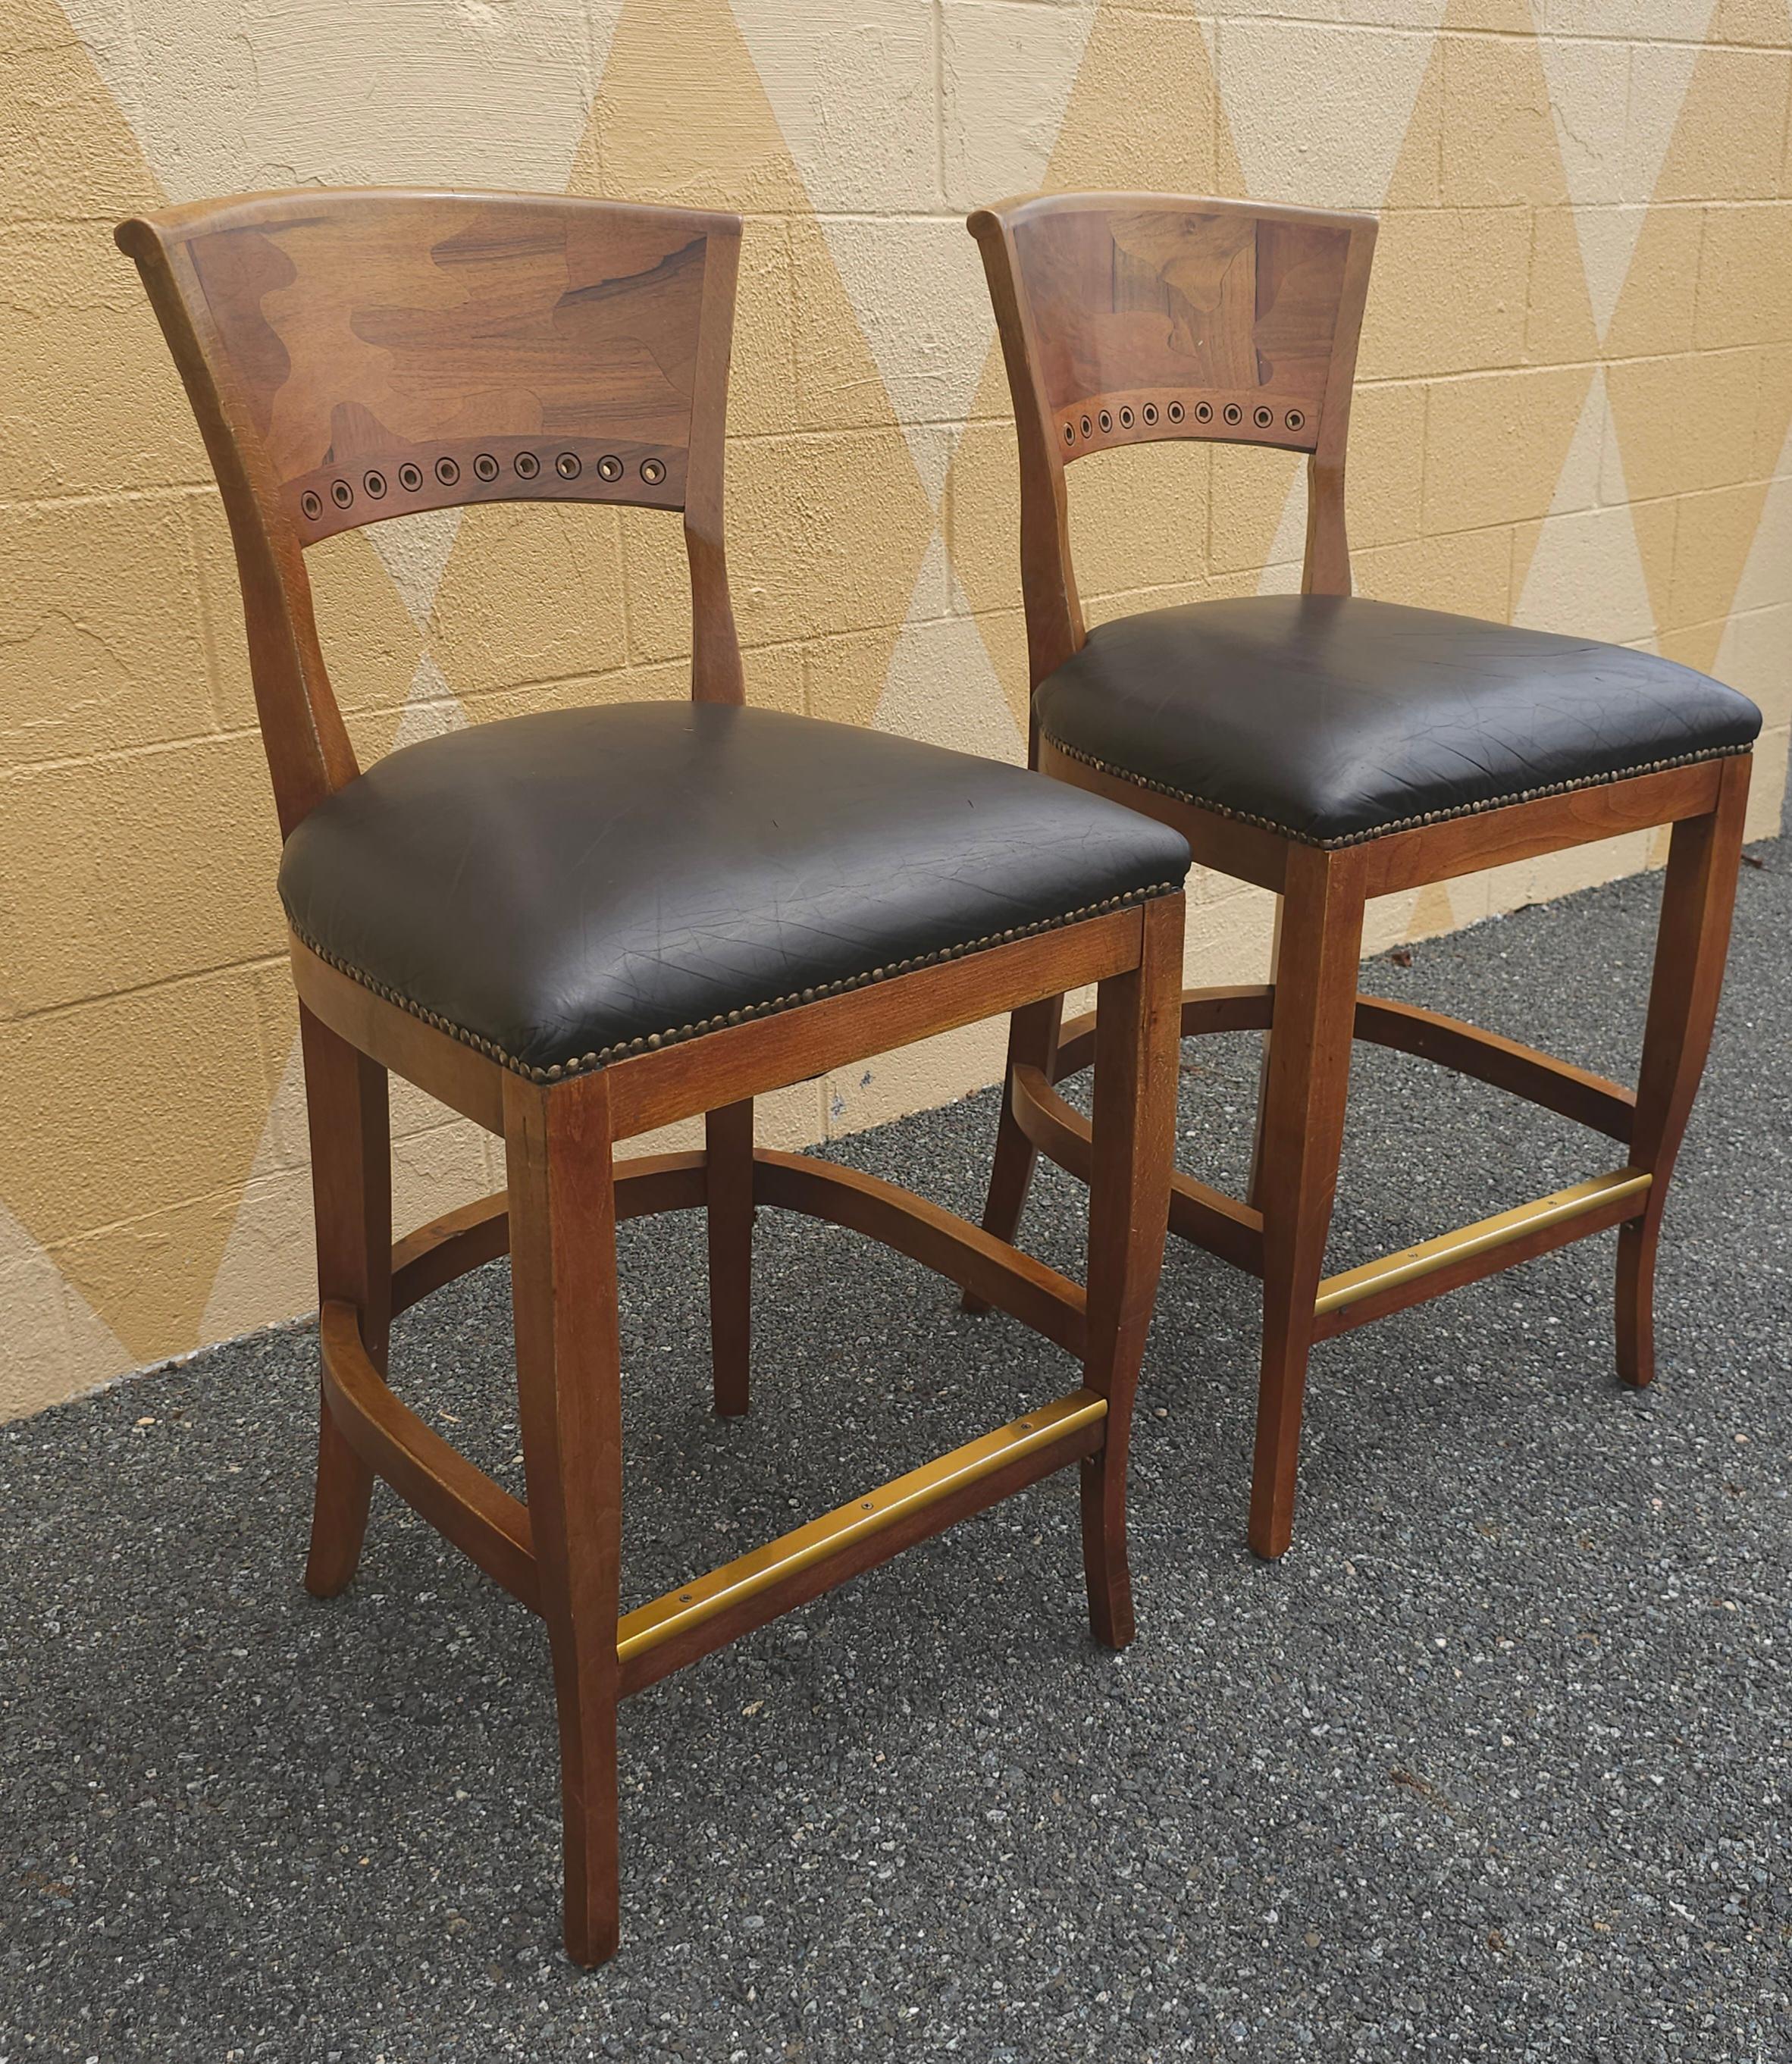 A pair of Italian Mixed Fruitwoods and quality Top Grain Leather Upholstered seat with Brass NailHeads trims and brass foot rest counter Stools. Sleek back rest with assorted mixed fruitwoods
Measures 19.5